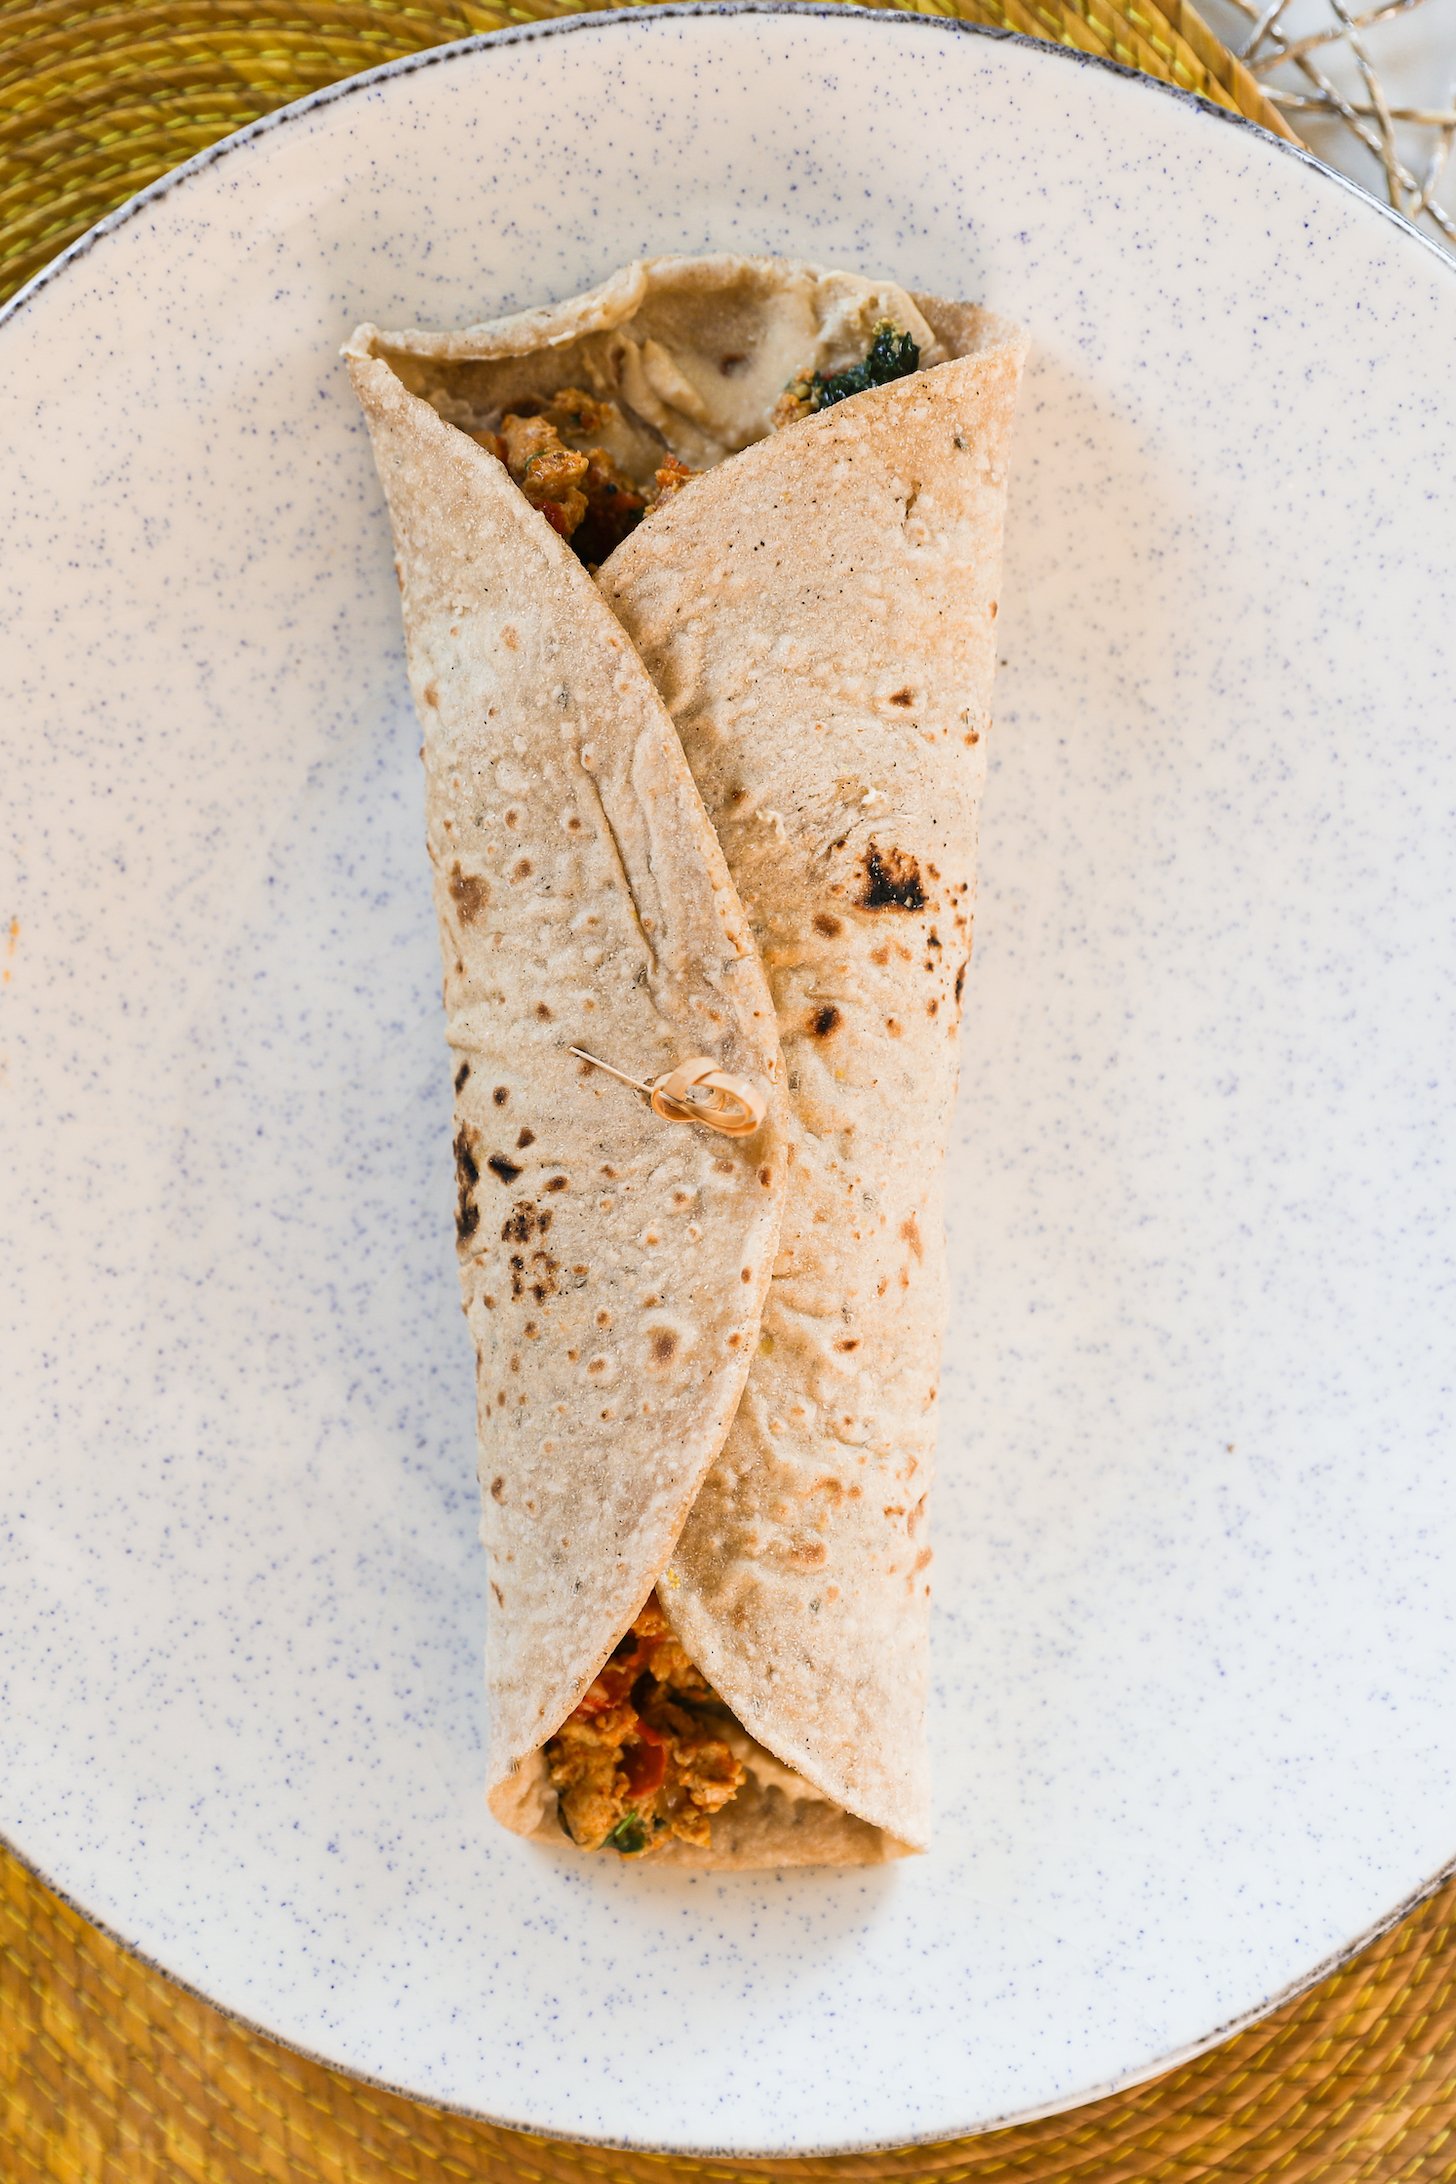 Top view snapshot displaying an Egg Bhurji Wrap neatly sealed with a knotted wooden pick